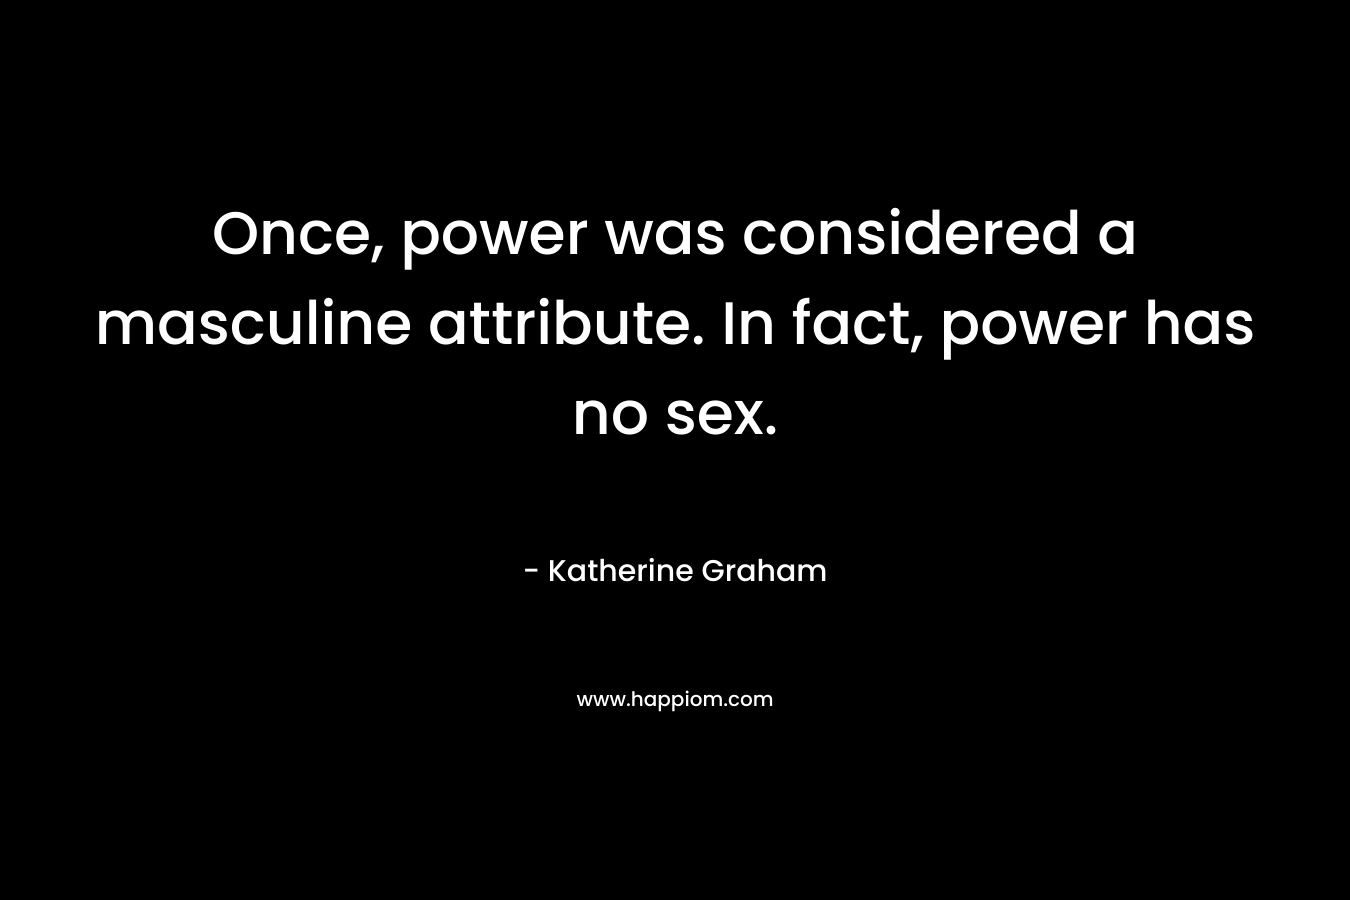 Once, power was considered a masculine attribute. In fact, power has no sex. – Katherine Graham